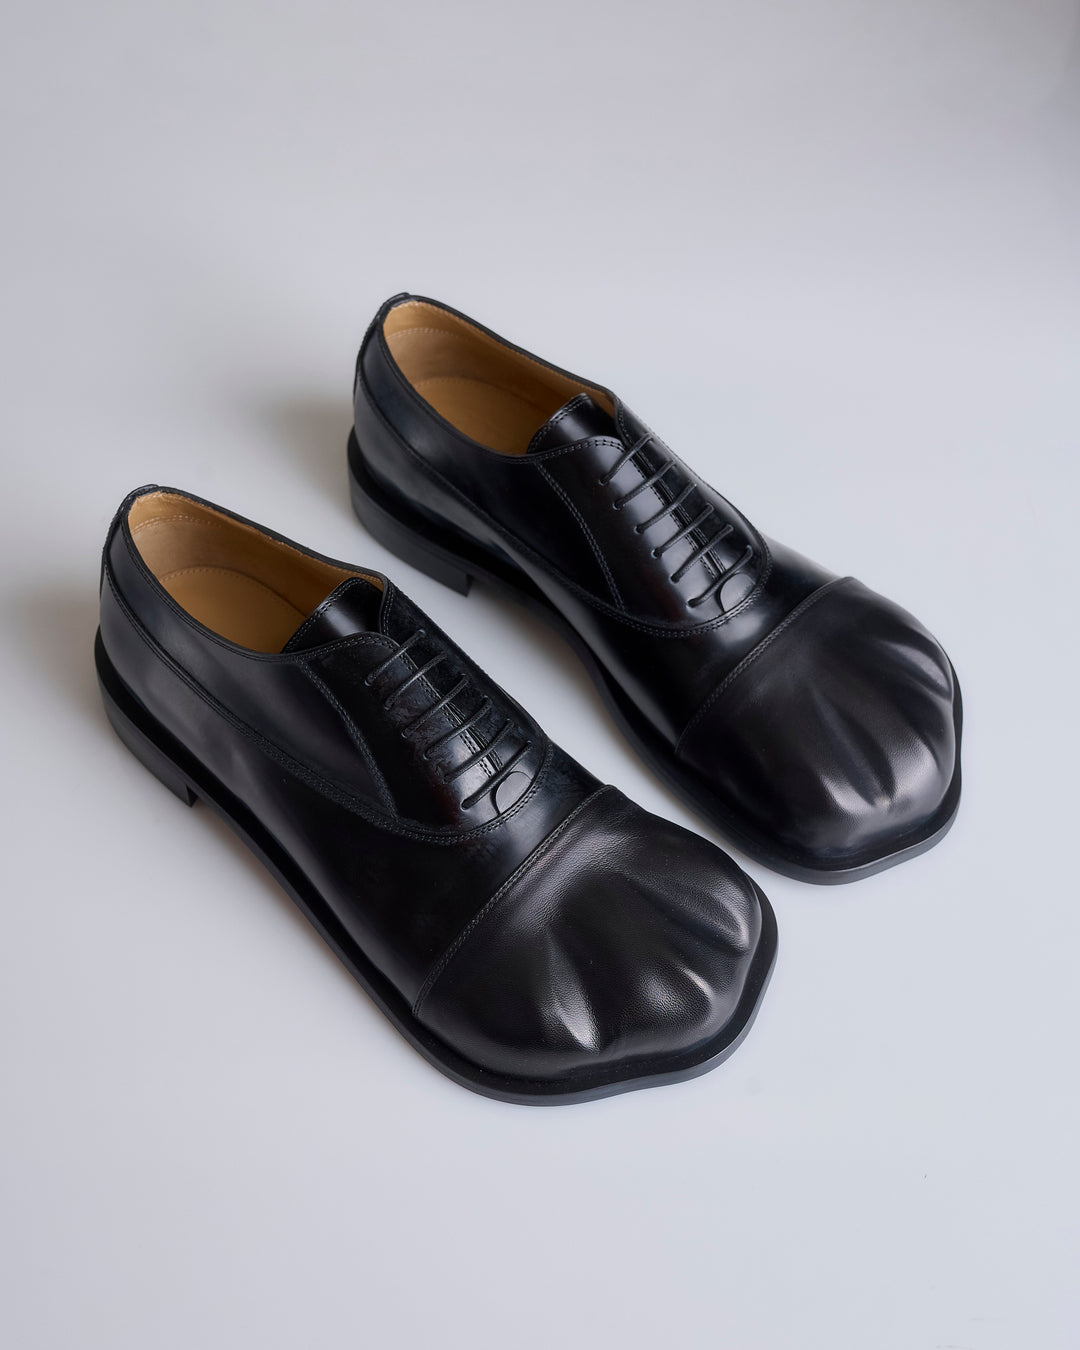 JW Anderson Paw Lace-Up Leather Black